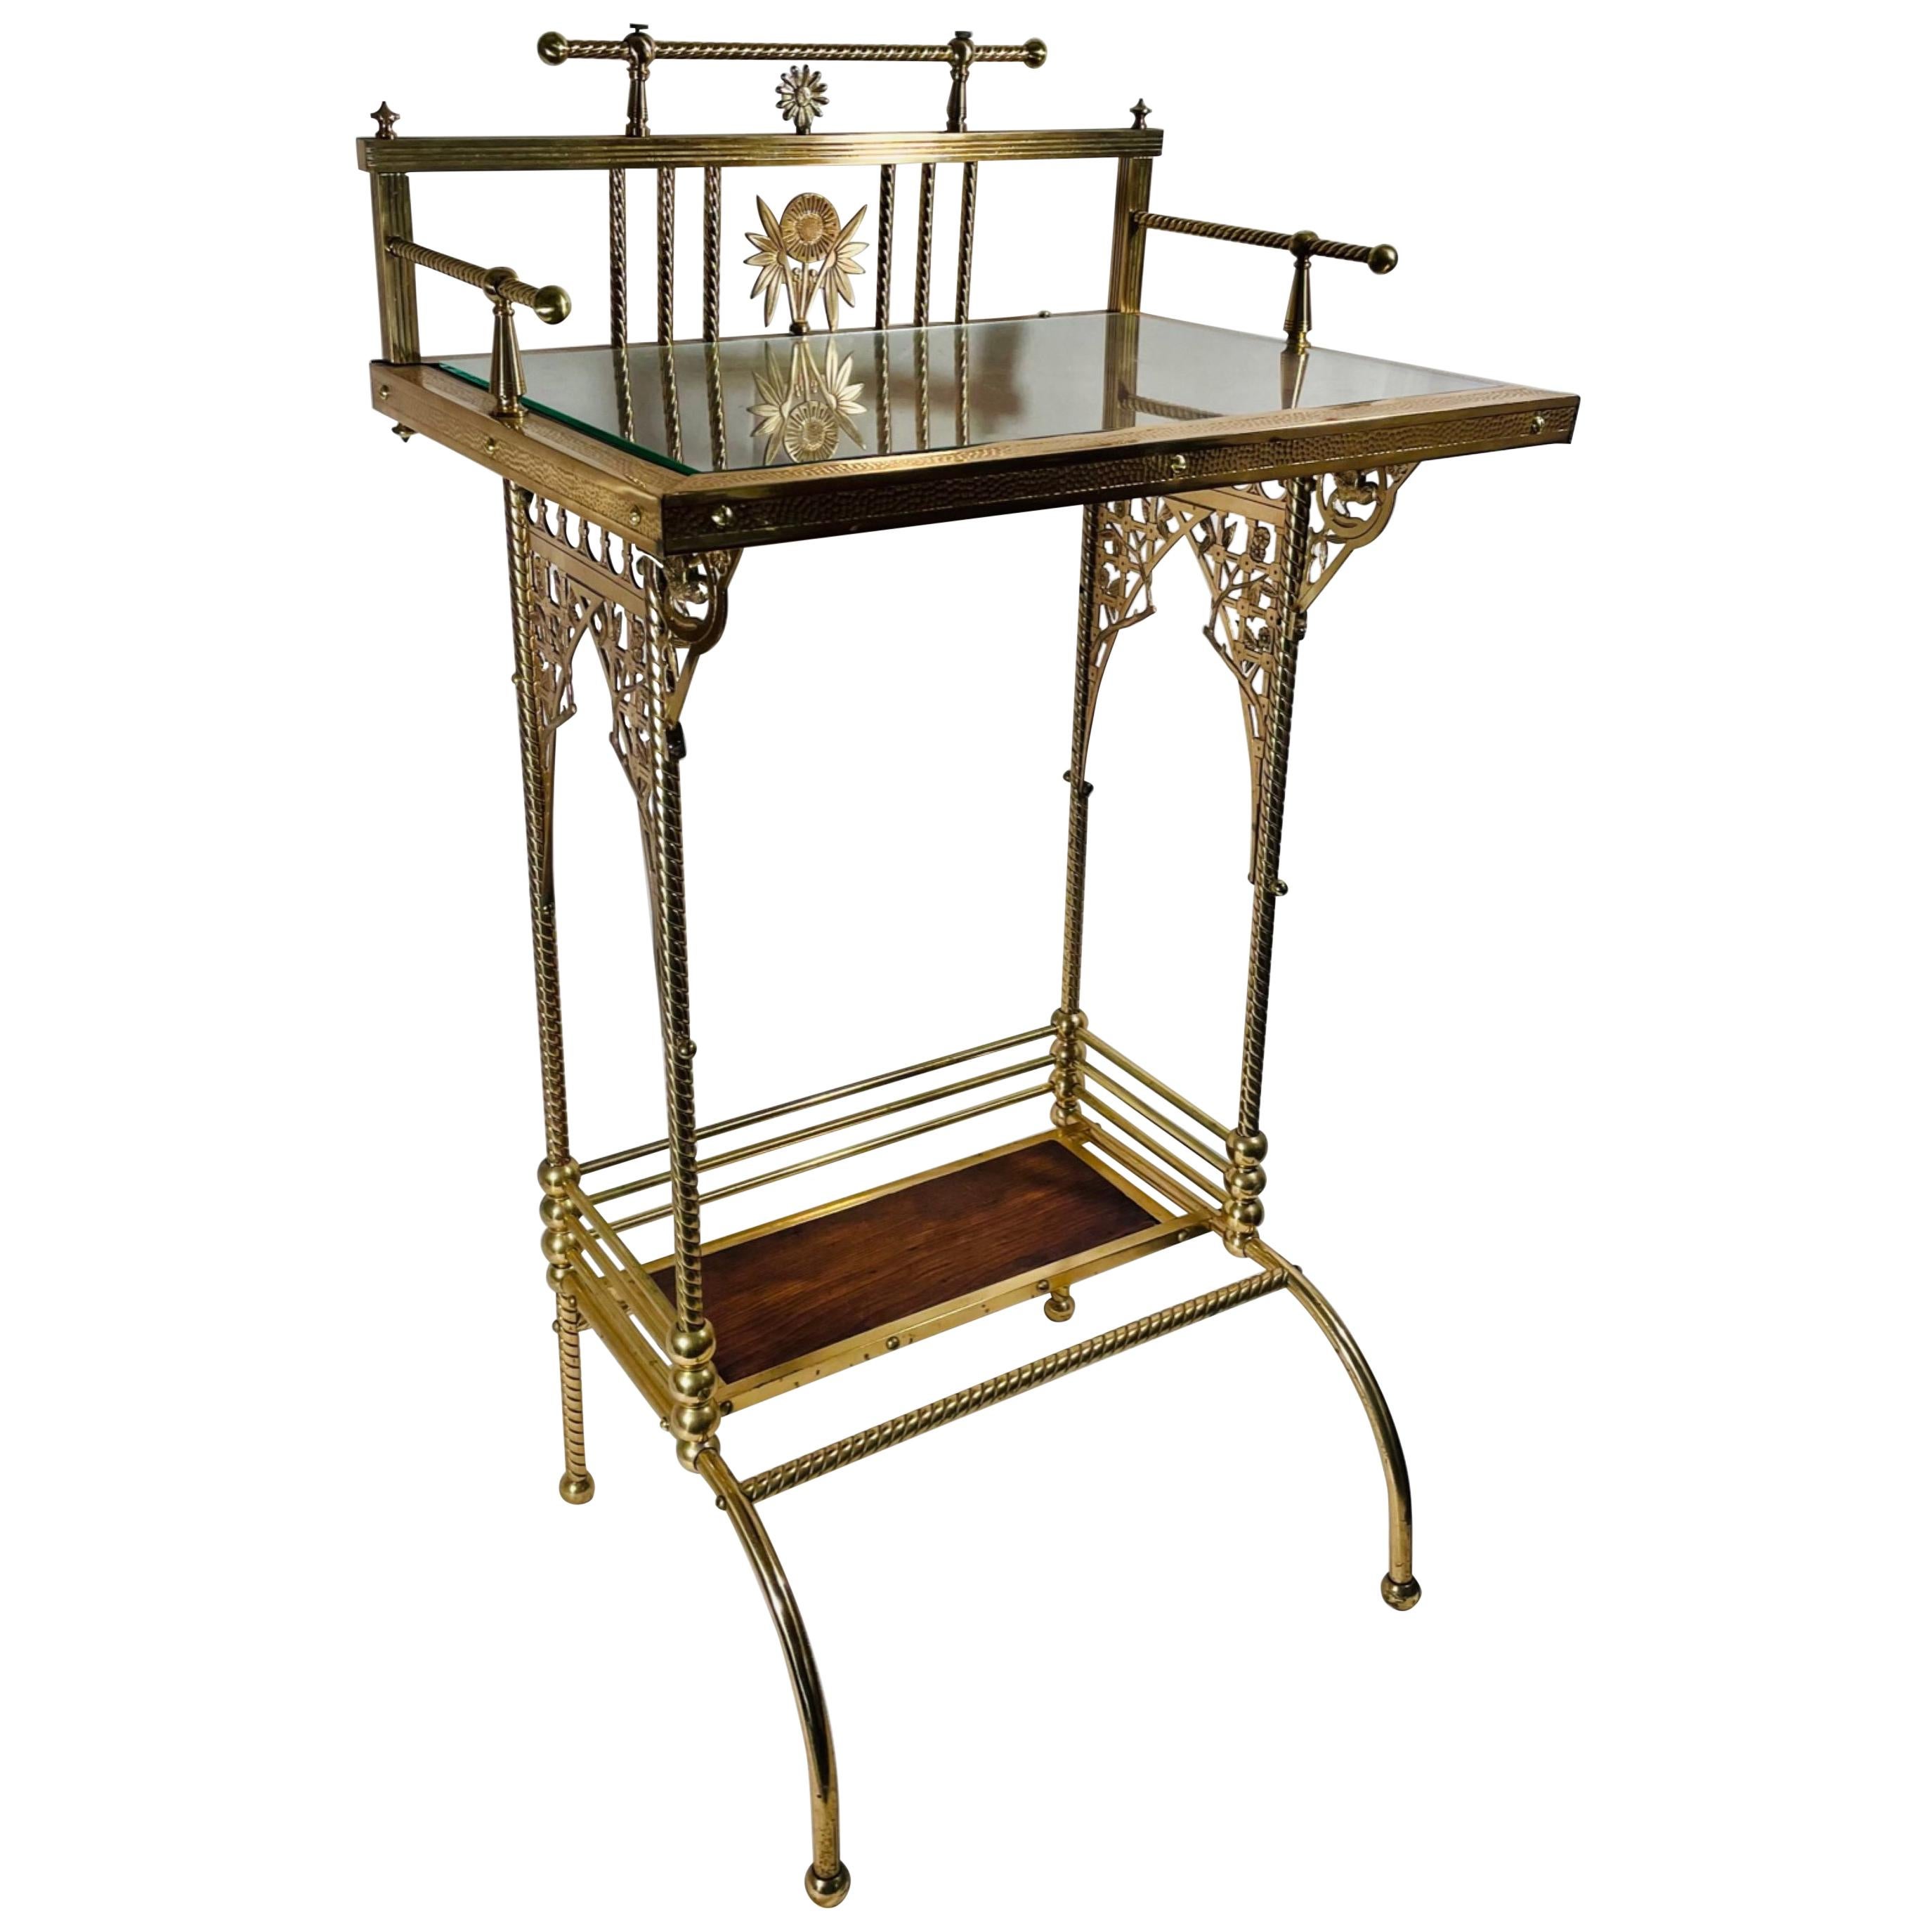 Charles Parker Aesthetic Movement Brass Telephone Table Stand, ca. 1880